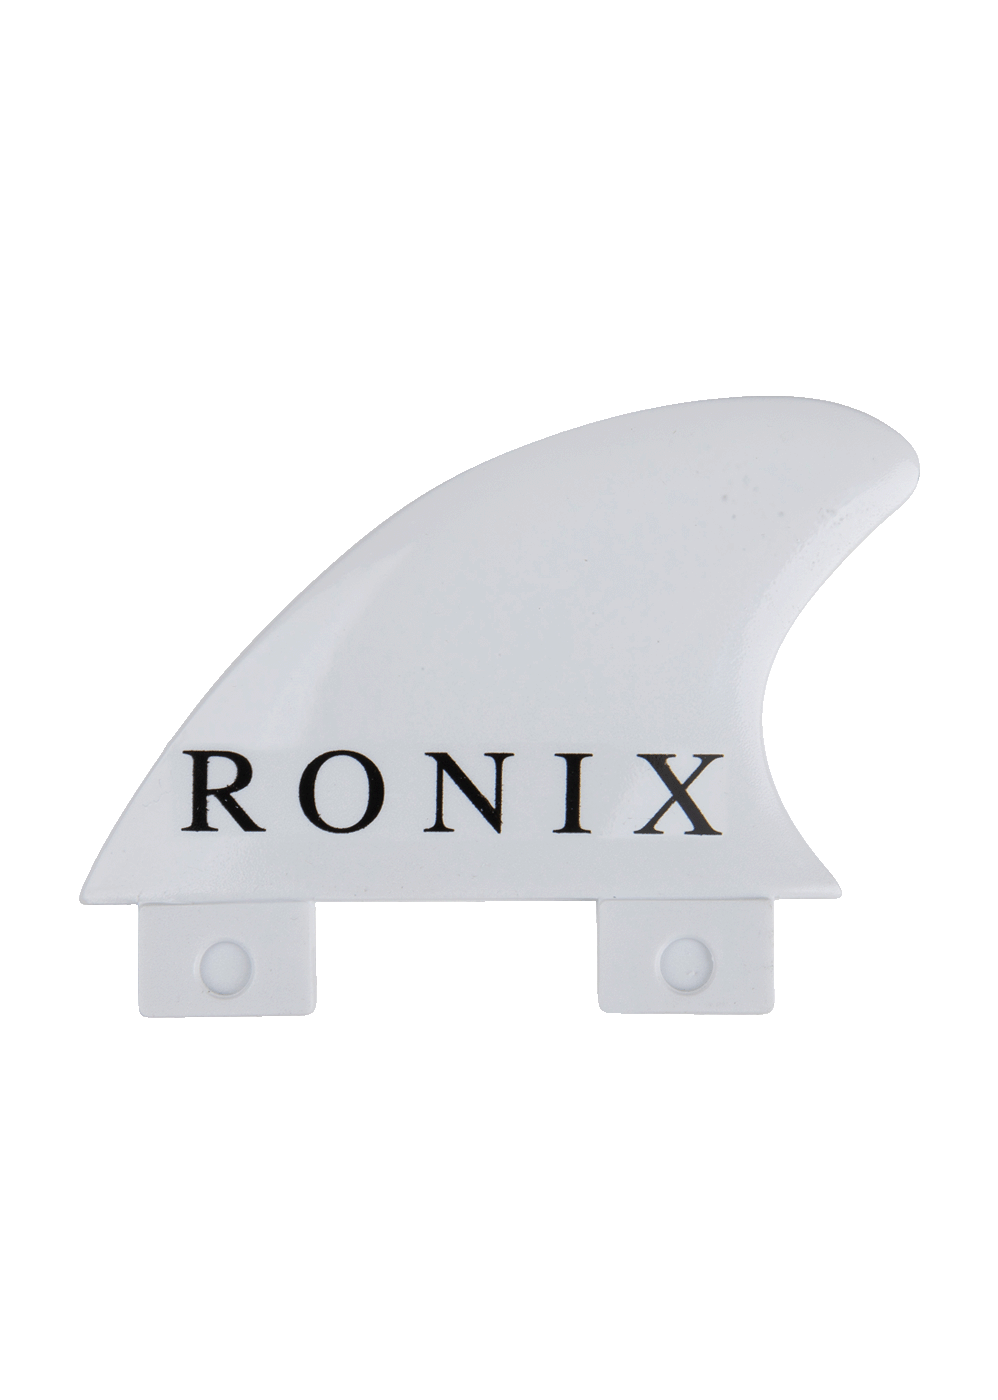 Ronix 2.9 Hook Bottom Mount FCS style Wakesurf Fin  new never used 